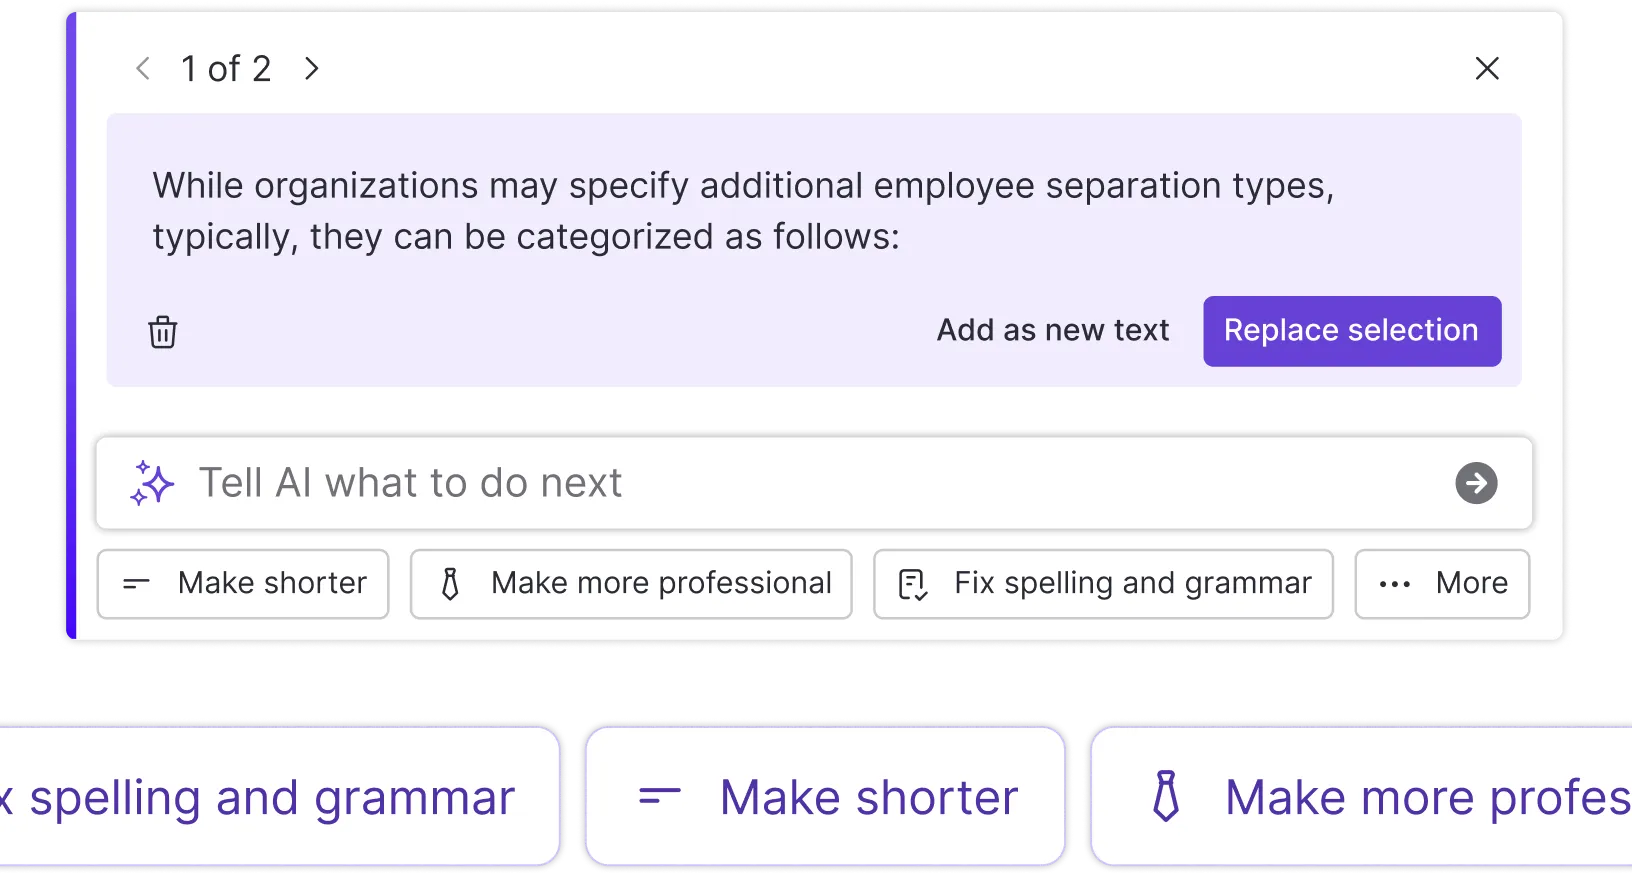 Improve text feature that is suggesting professional copy for a design. There are options to make the copy shorter, fix spelling and grammar, or make the copy sound more professional.